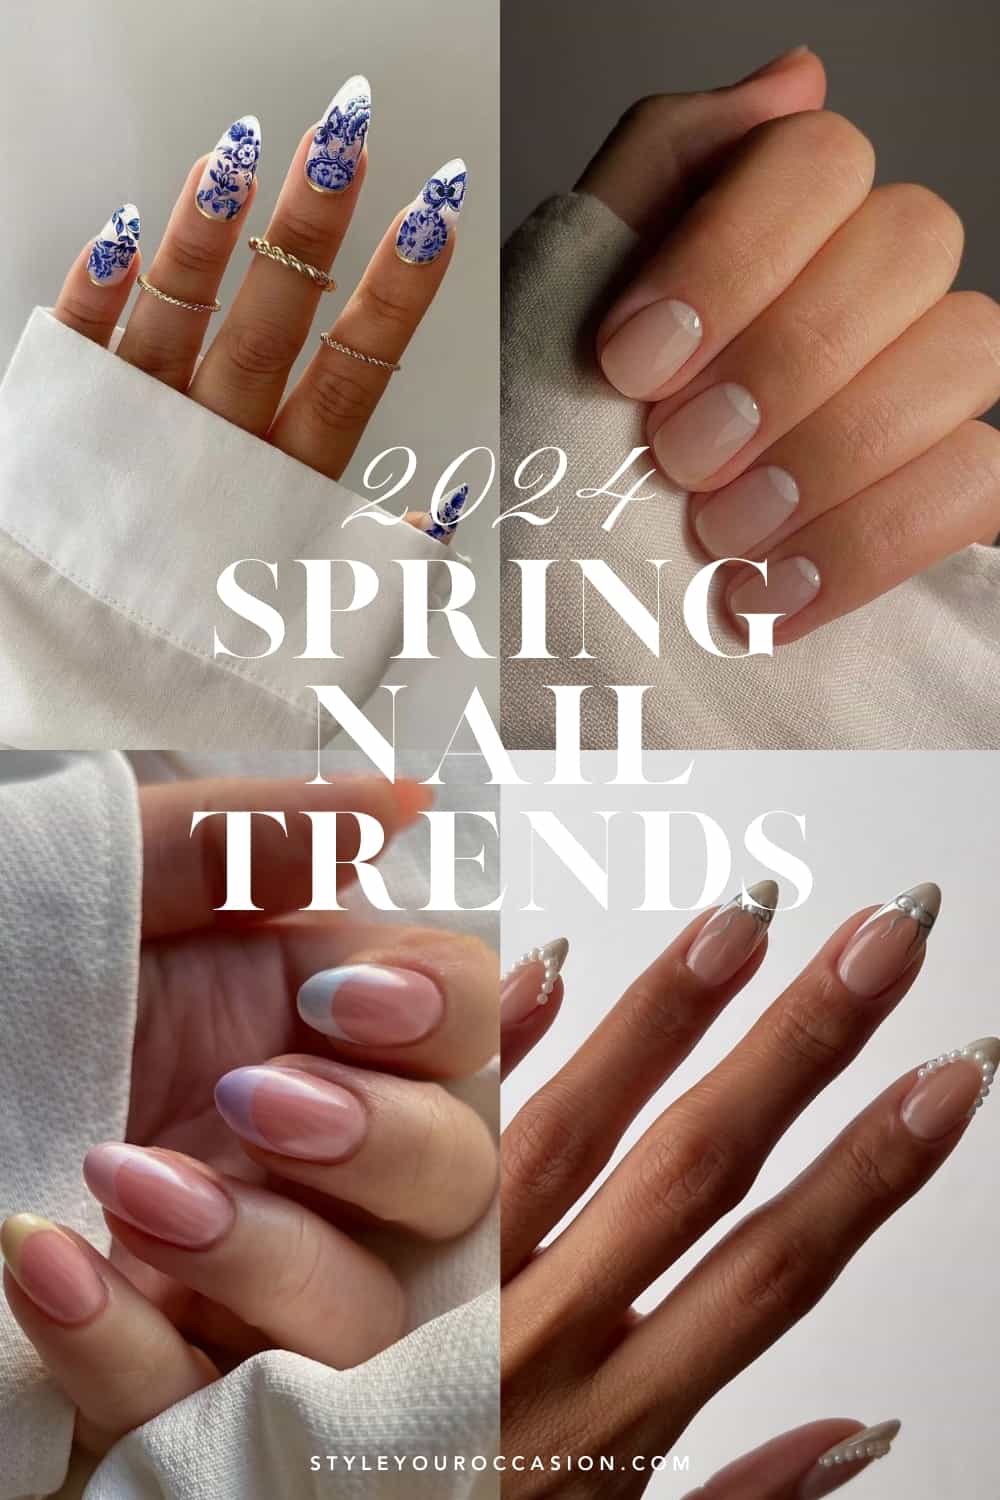 collage of four hands with nail designs that represent 2024 spring trends including blue porcelain art, clean girl nails, chrome, and pastels